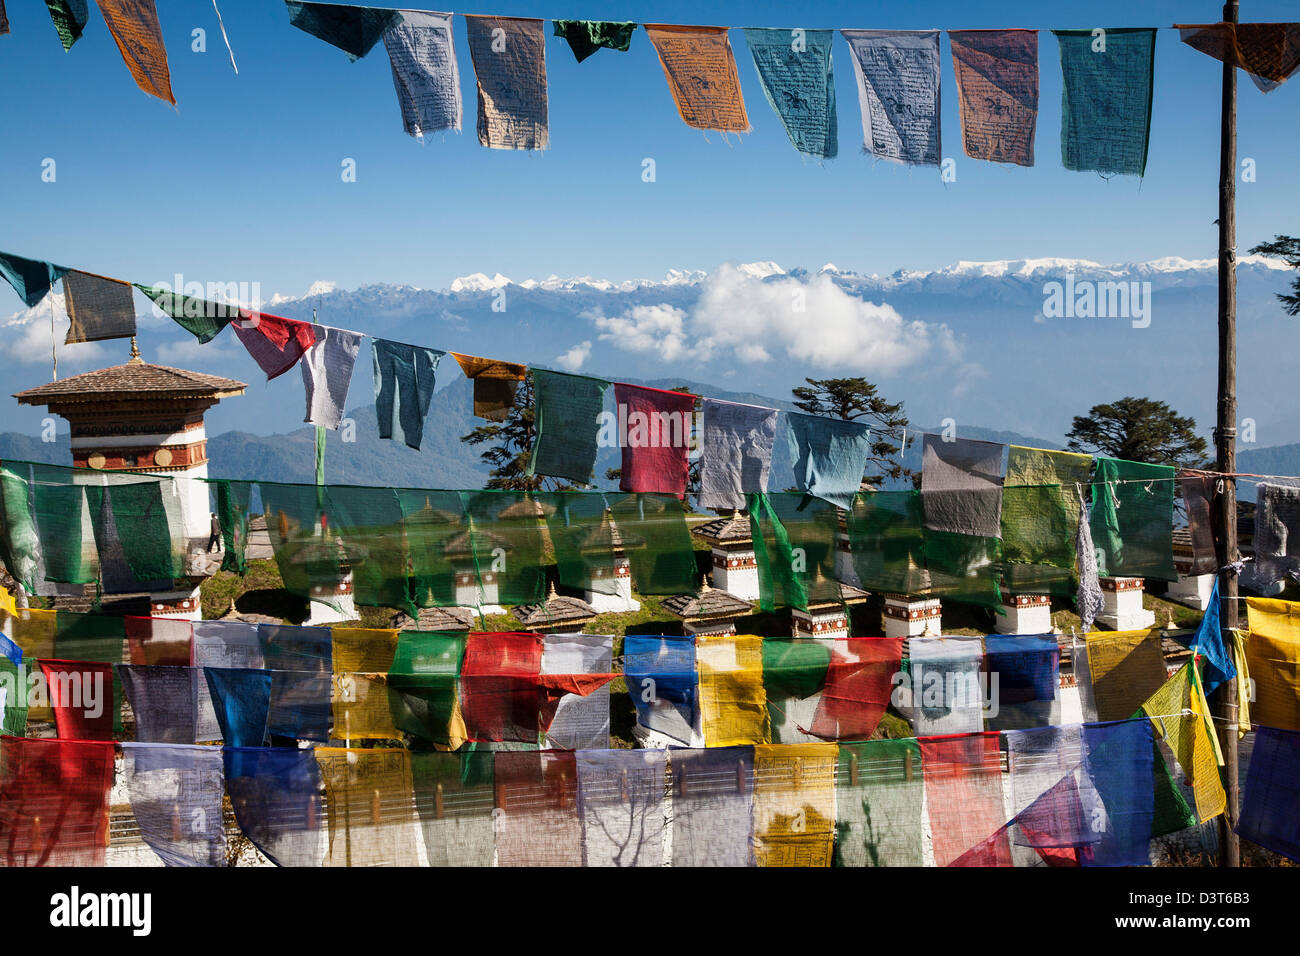 Prayer flags decorate Dochula (pass) at 3,150 metres high with the eastern Himalaya in the background. Stock Photo